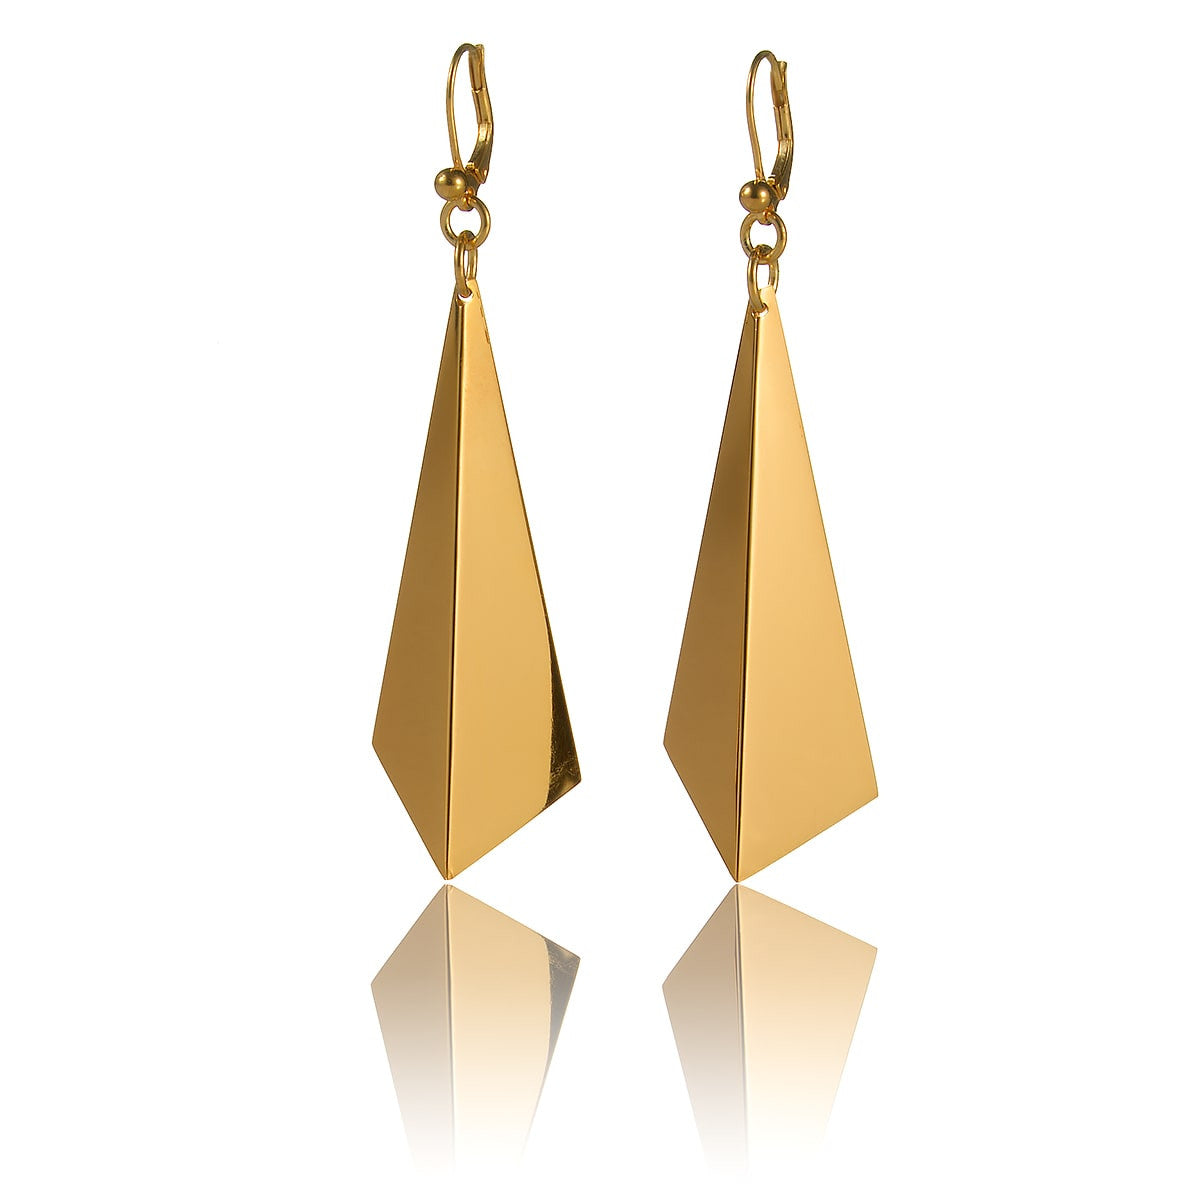 Striking contemporary geometric earrings from iconic Facet collection.  Material: 18 karat gold-plated silver.